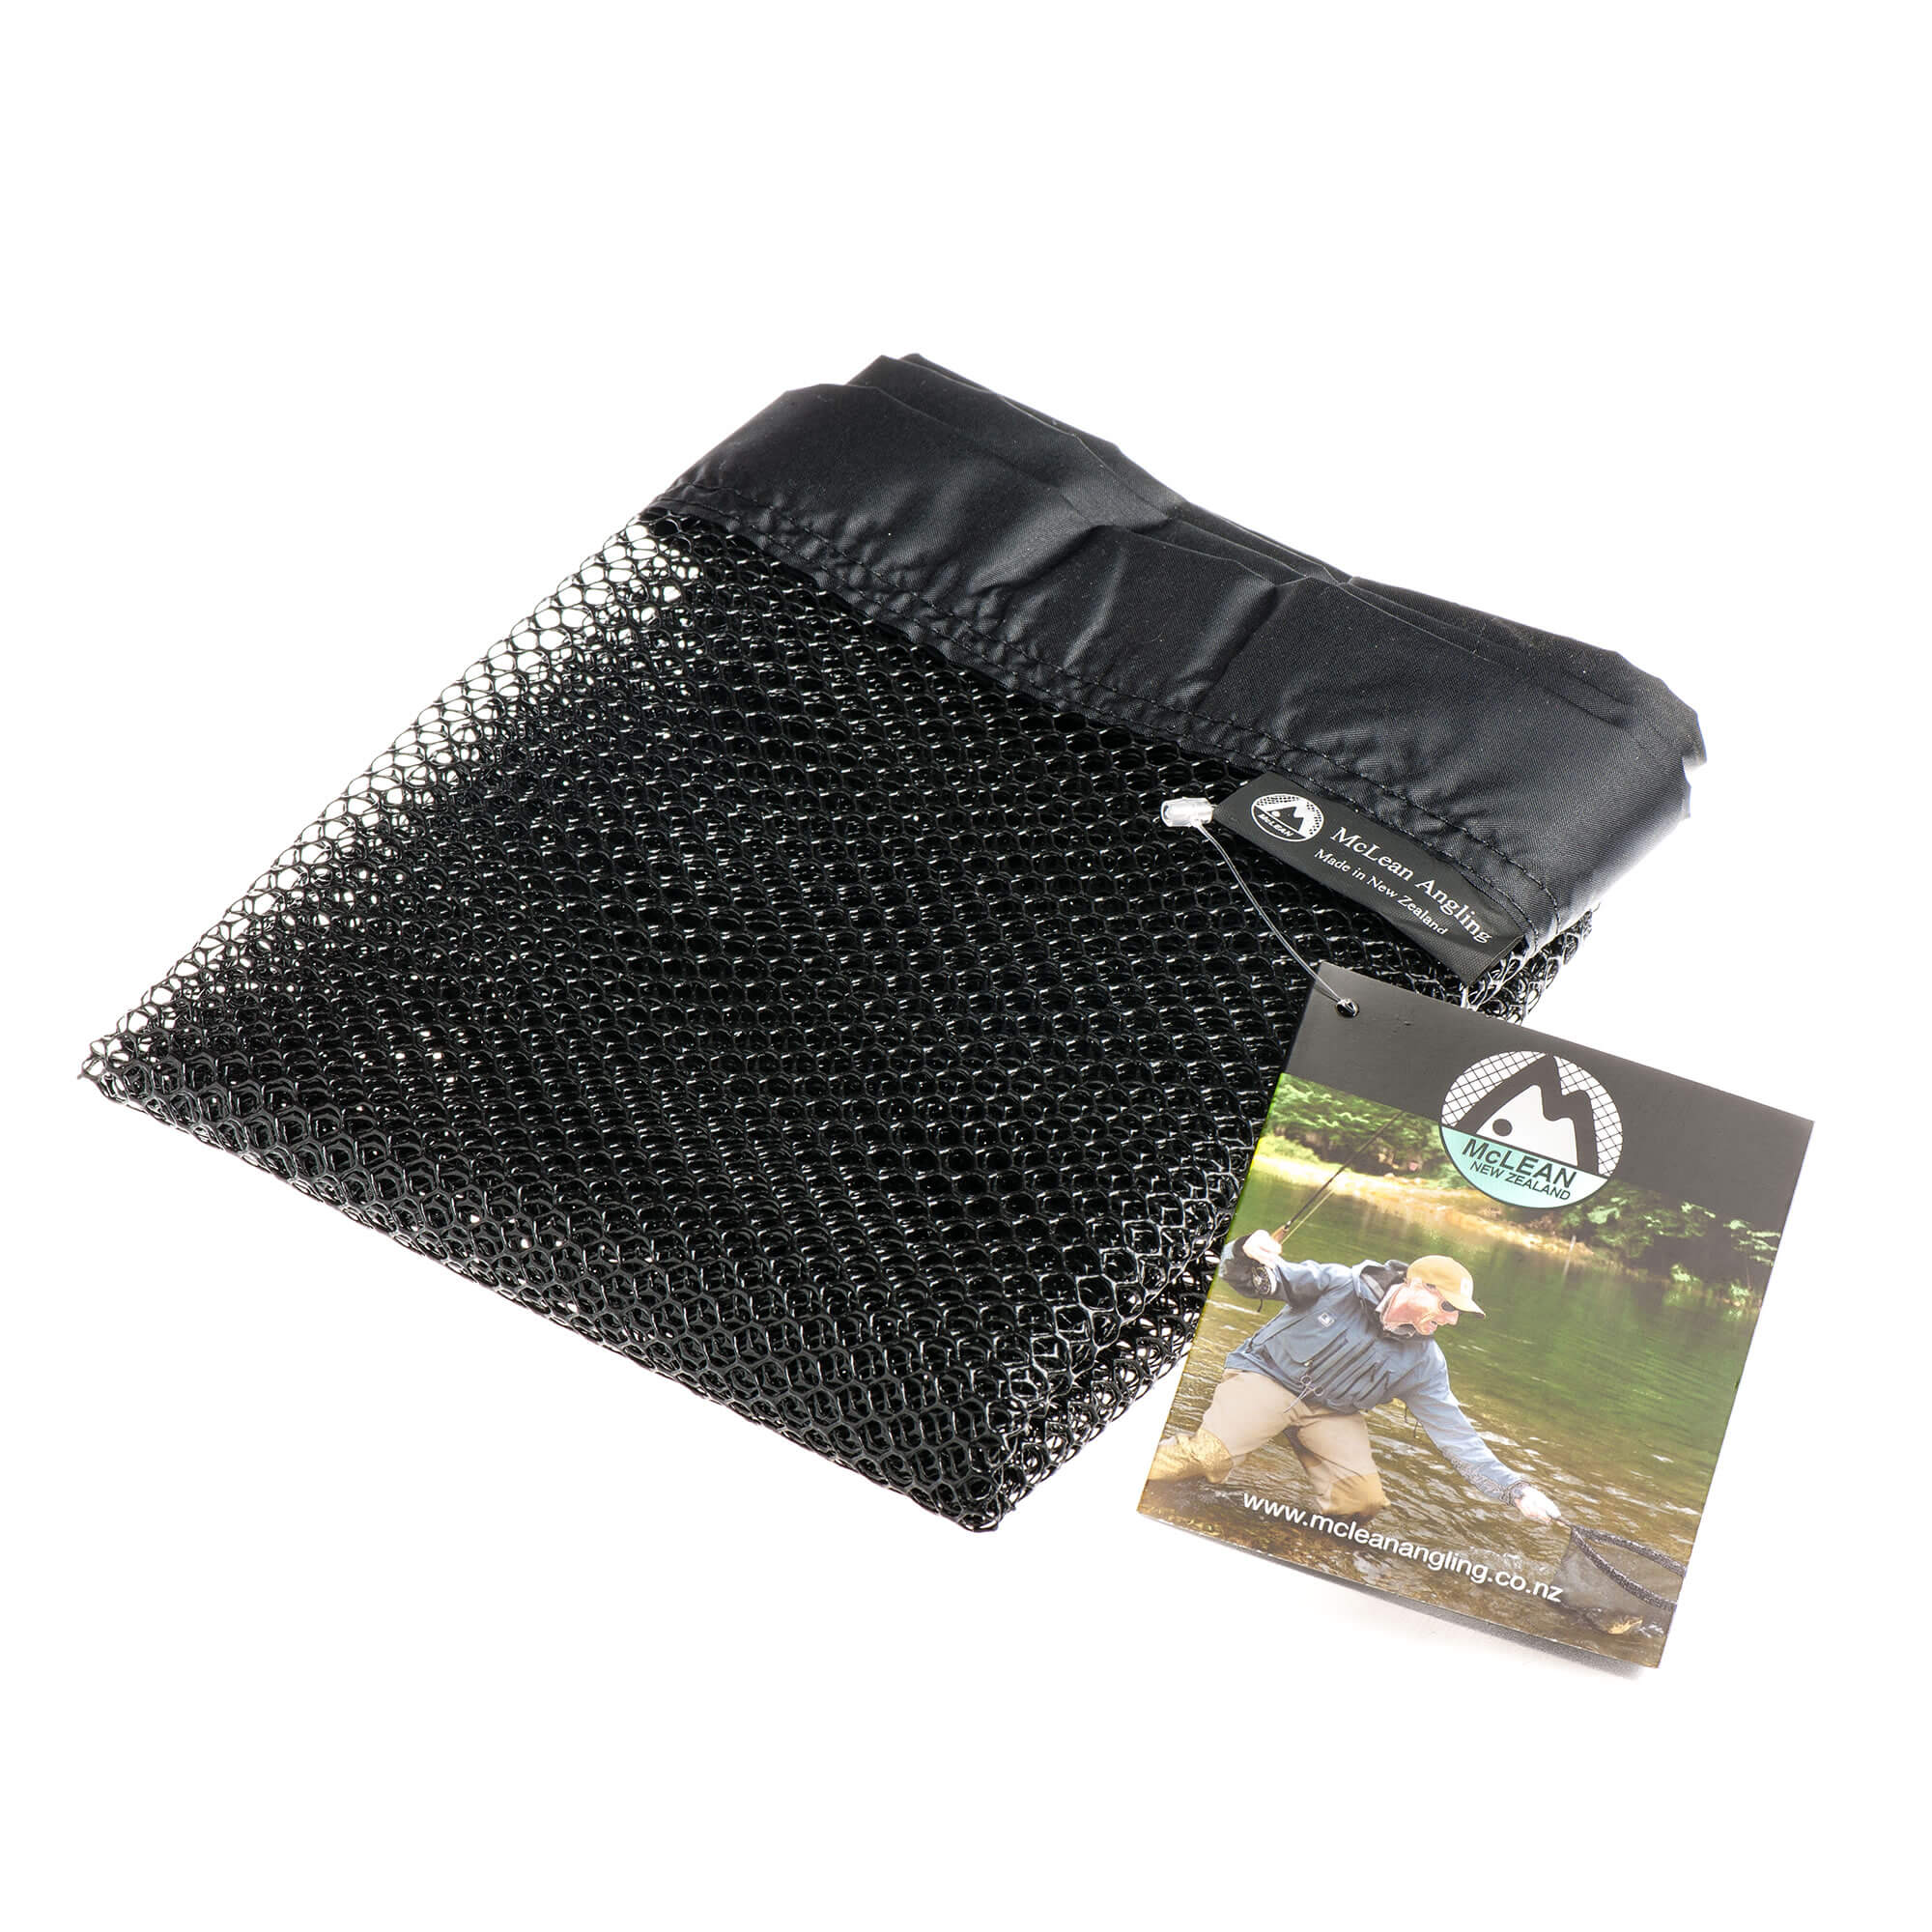 Mclean Replacement Rubber Netbag Xxl (R140, R706I, R420)